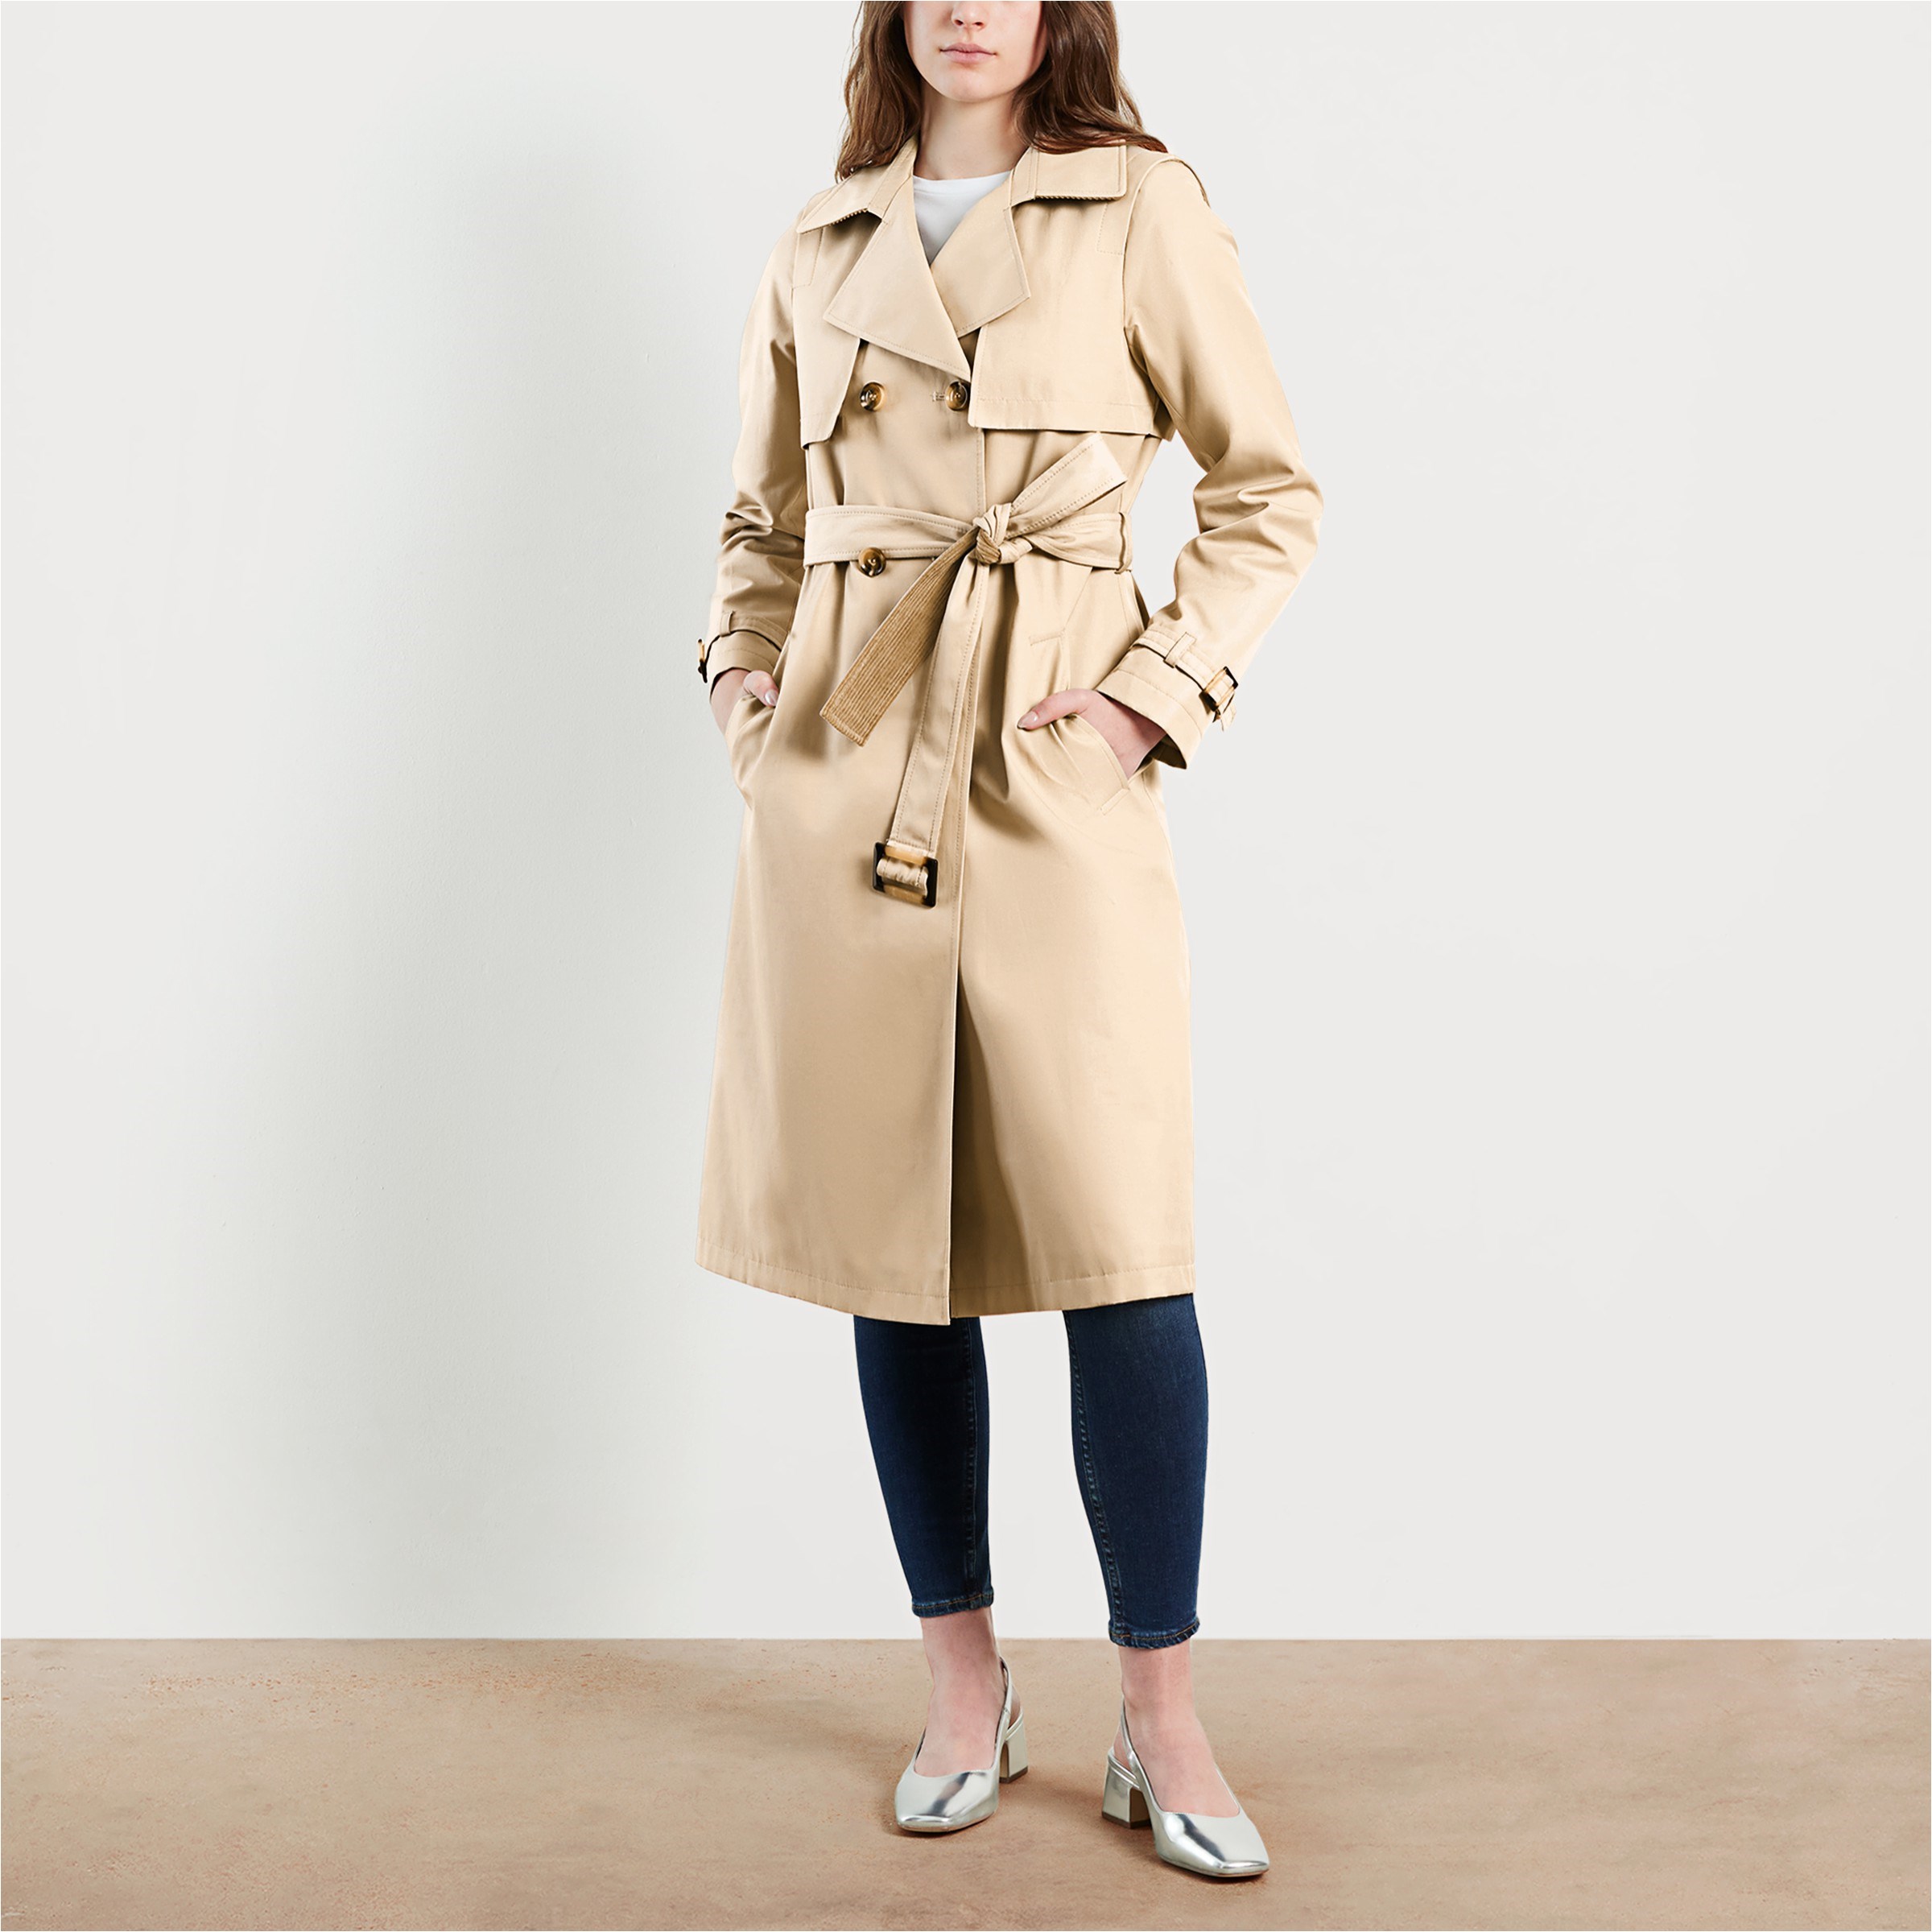 Gum delikatesse snak Sam Edelman Belted Trench Coat | Accessories Coats and Jackets